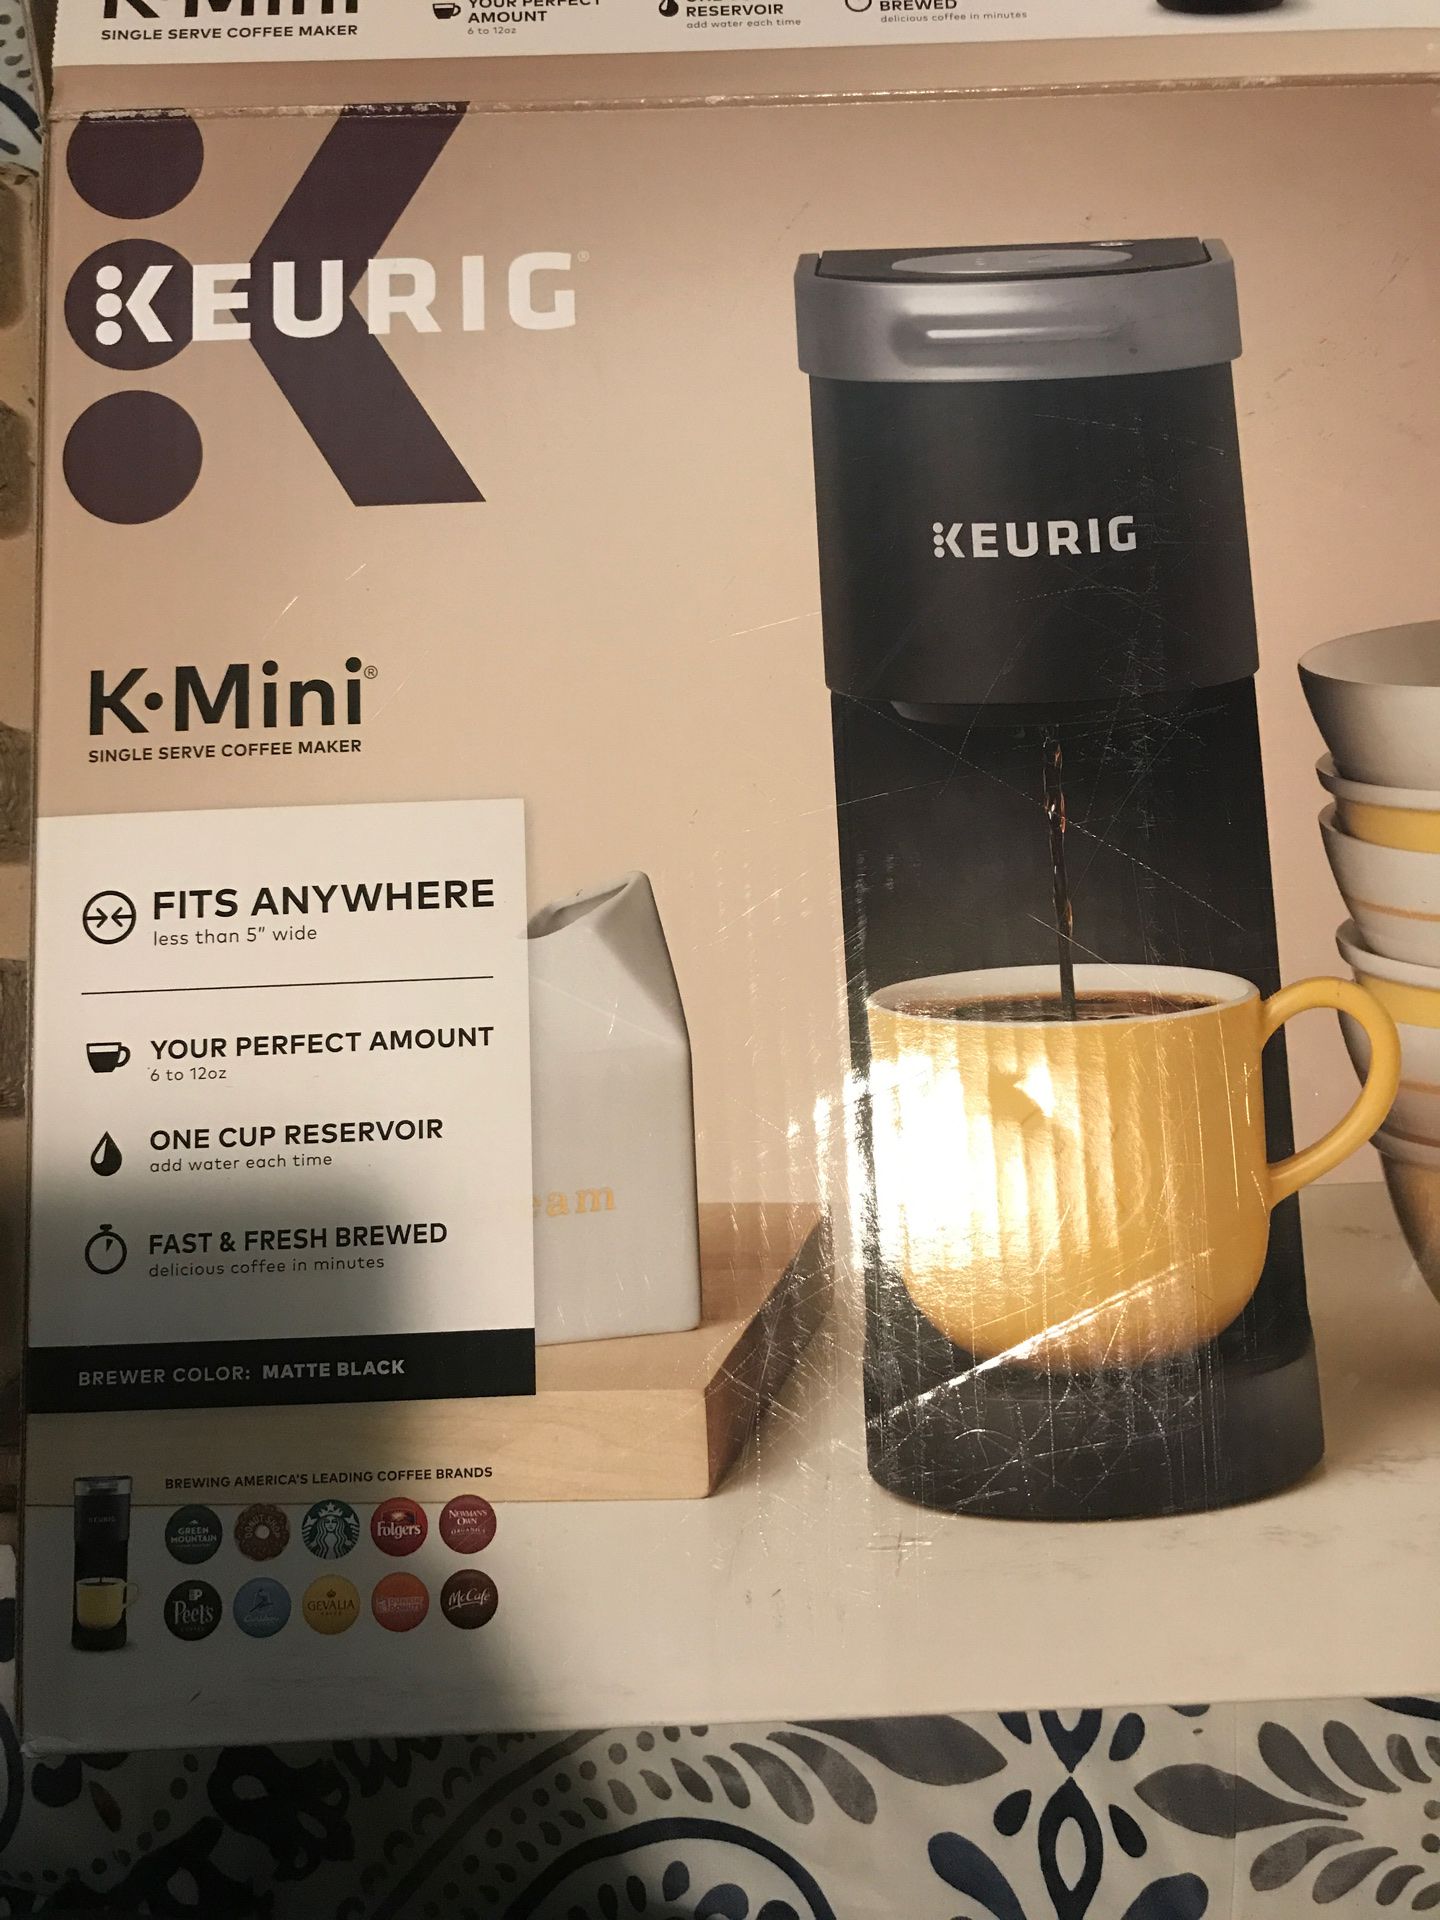 Keurig for sale never been used